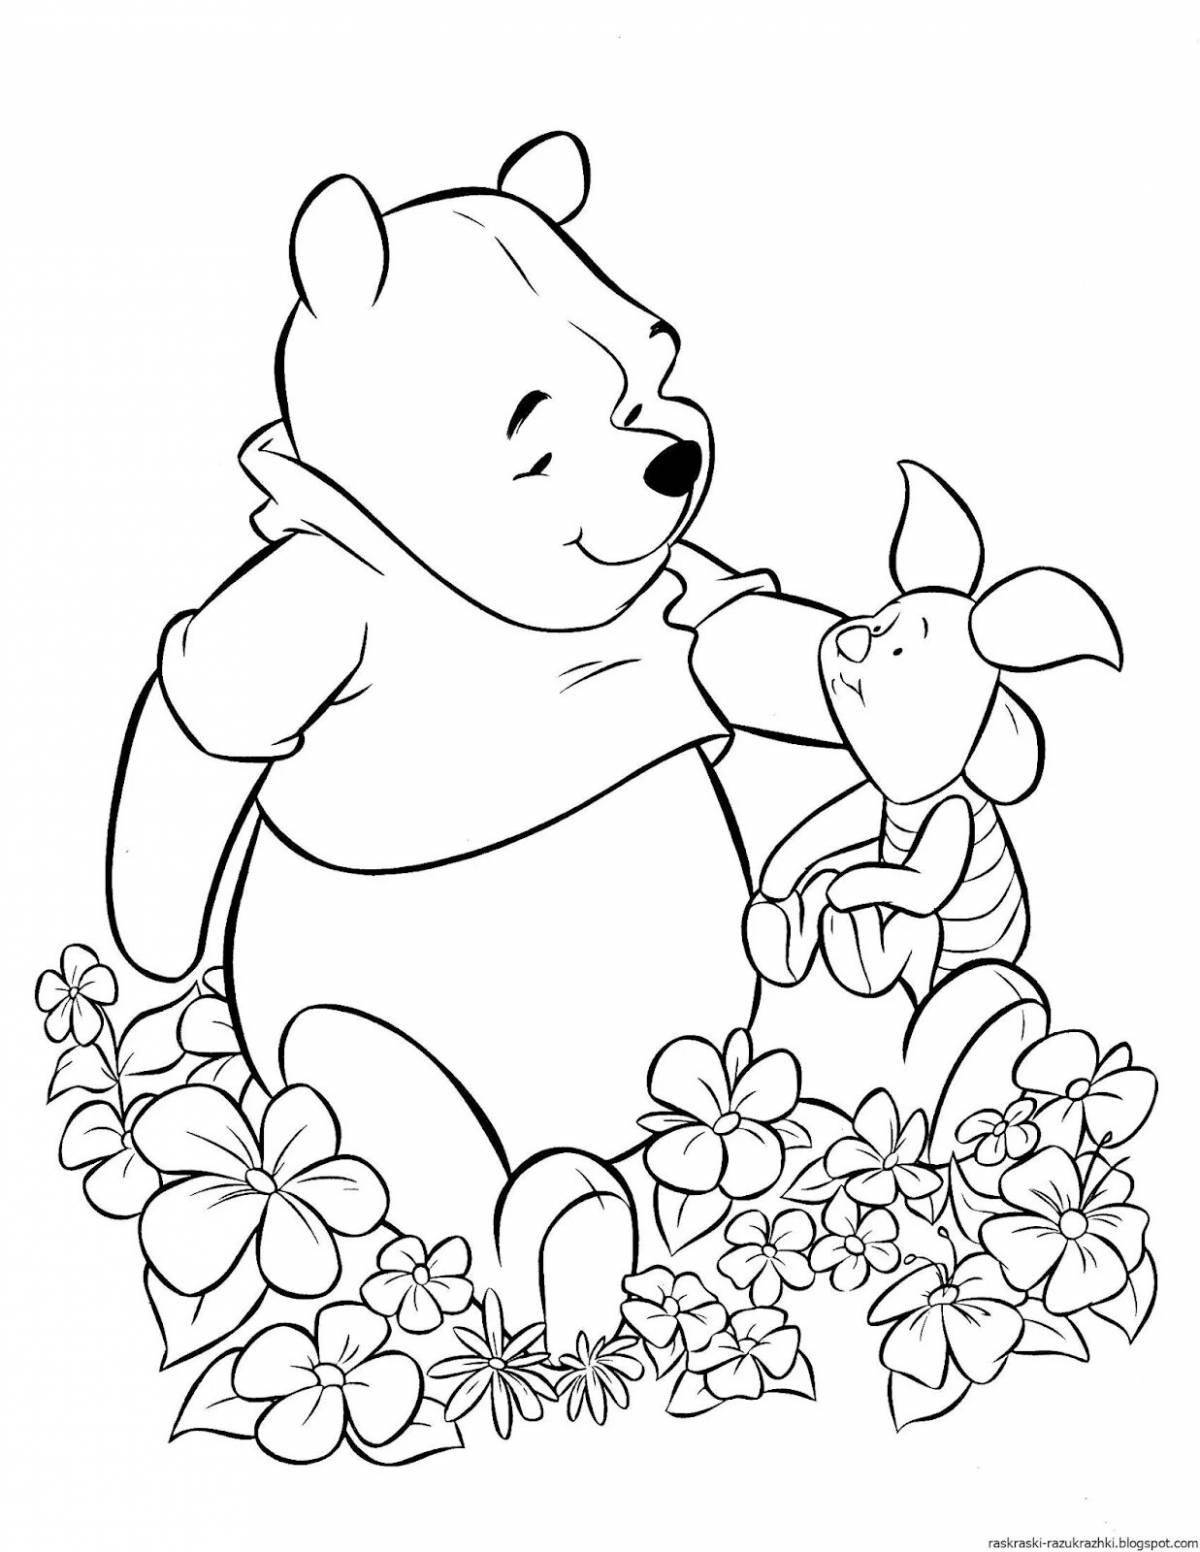 Winnie the Pooh fun coloring book for kids